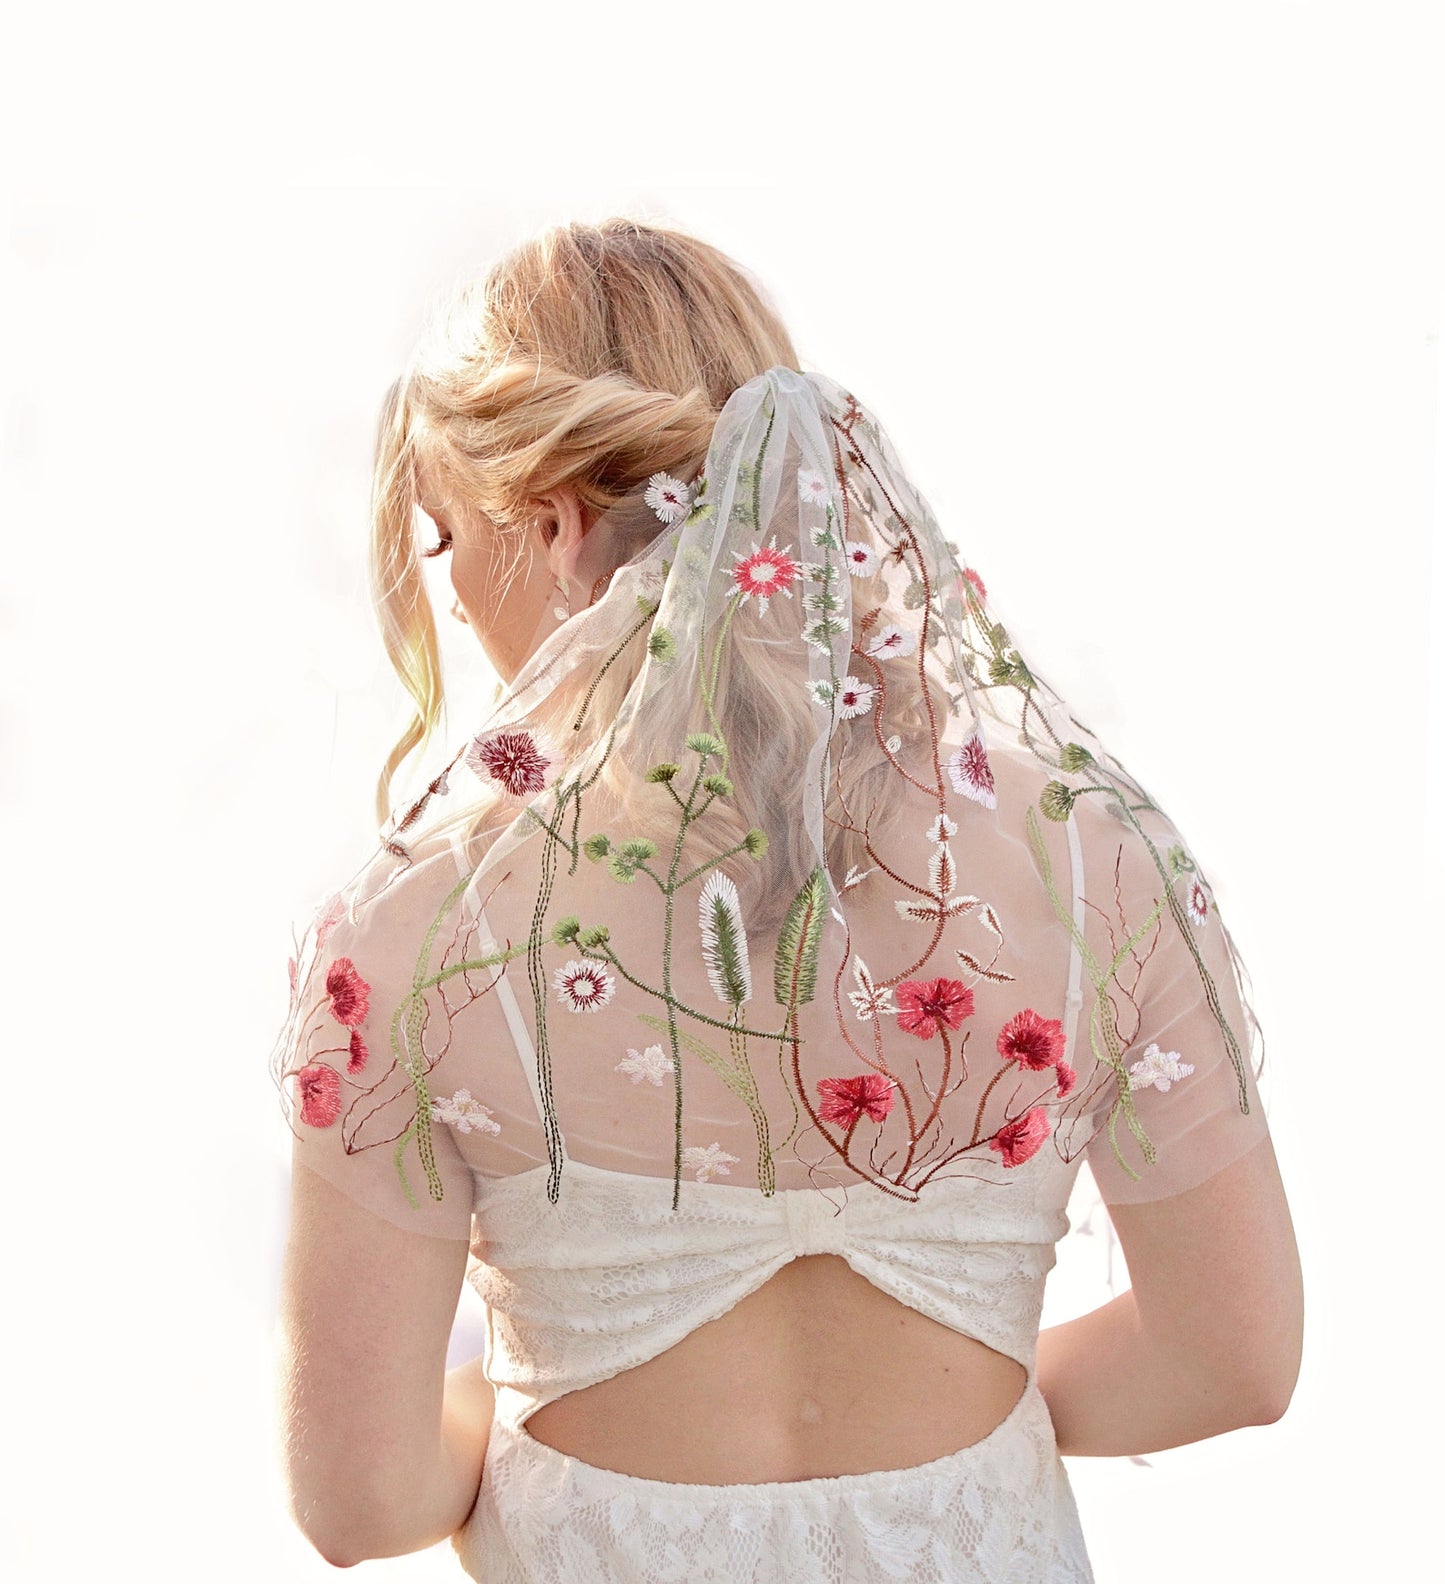 Shorty wildflower embroidered floral veil